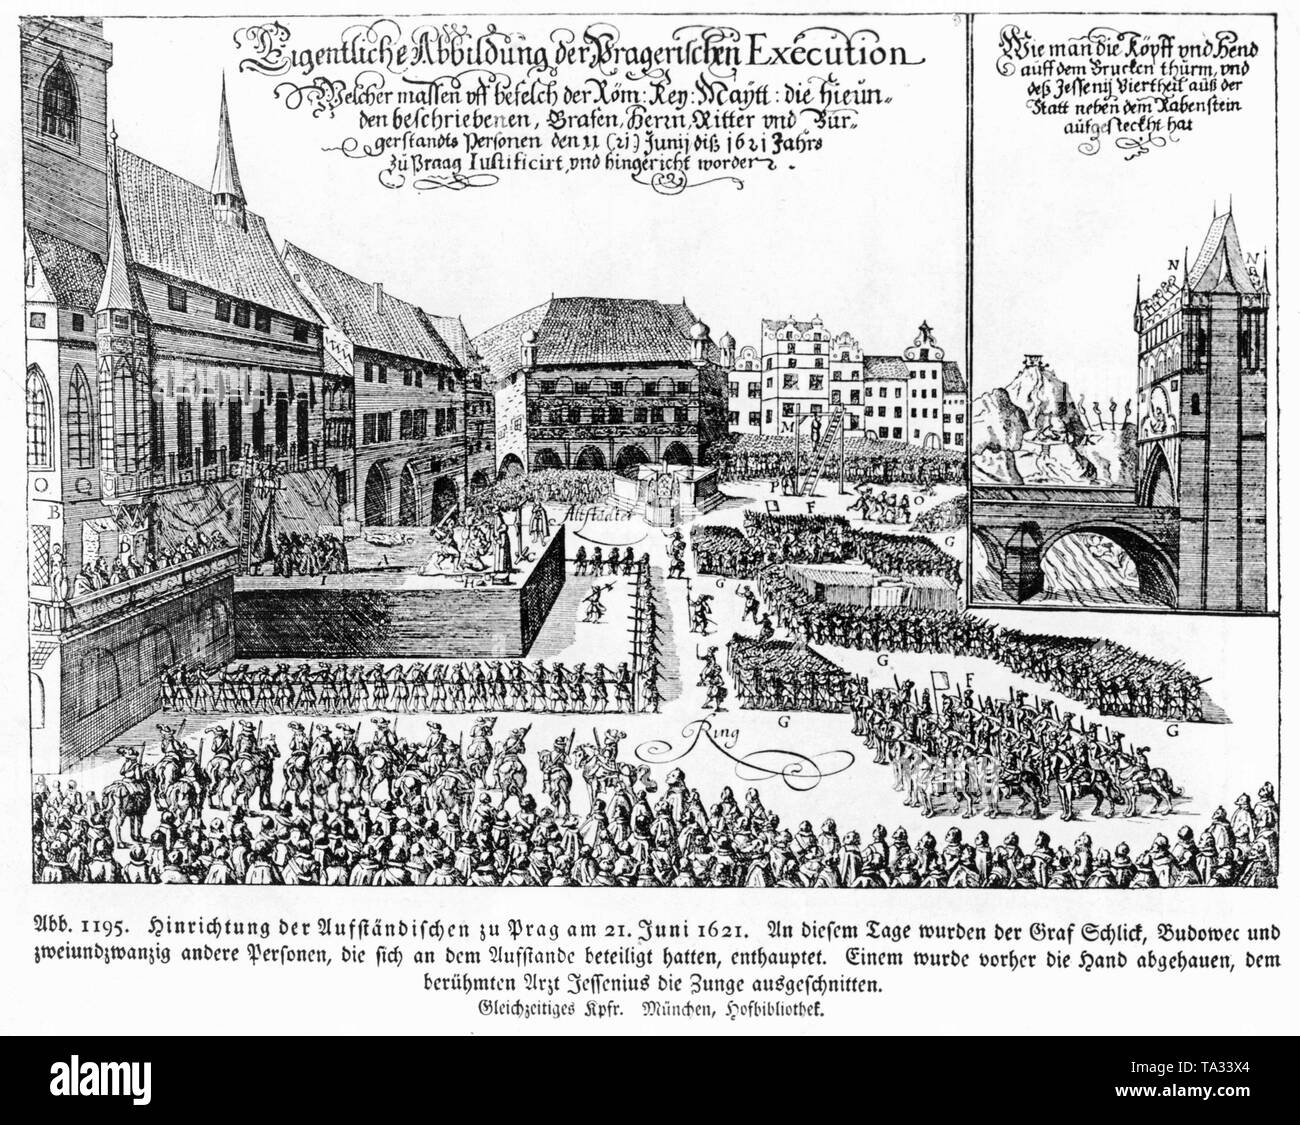 Execution of the Bohemian insurgents at the Old Town Square in Prague. Count Joachim Andreas von Schlick, Wenzel Wilhelm Freiherr Budowecz of Budowa and twenty-two other people, who took part in the uprising, are beheaded. Stock Photo